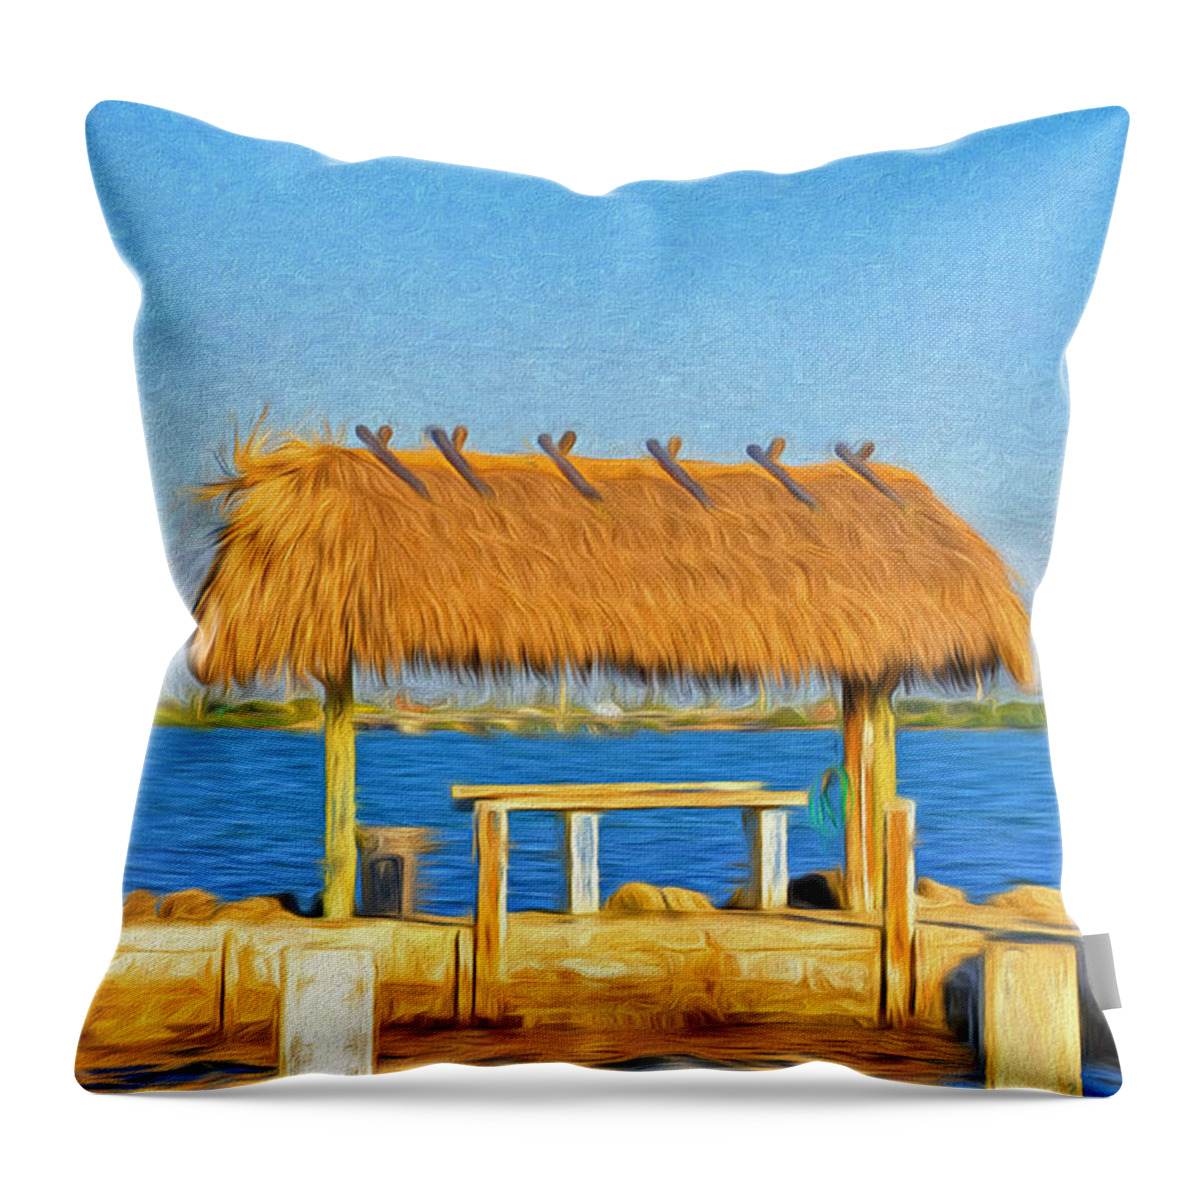 Thatch Throw Pillow featuring the photograph Chickee Hut at Parmer's Resort in Florida Keys by Ginger Wakem